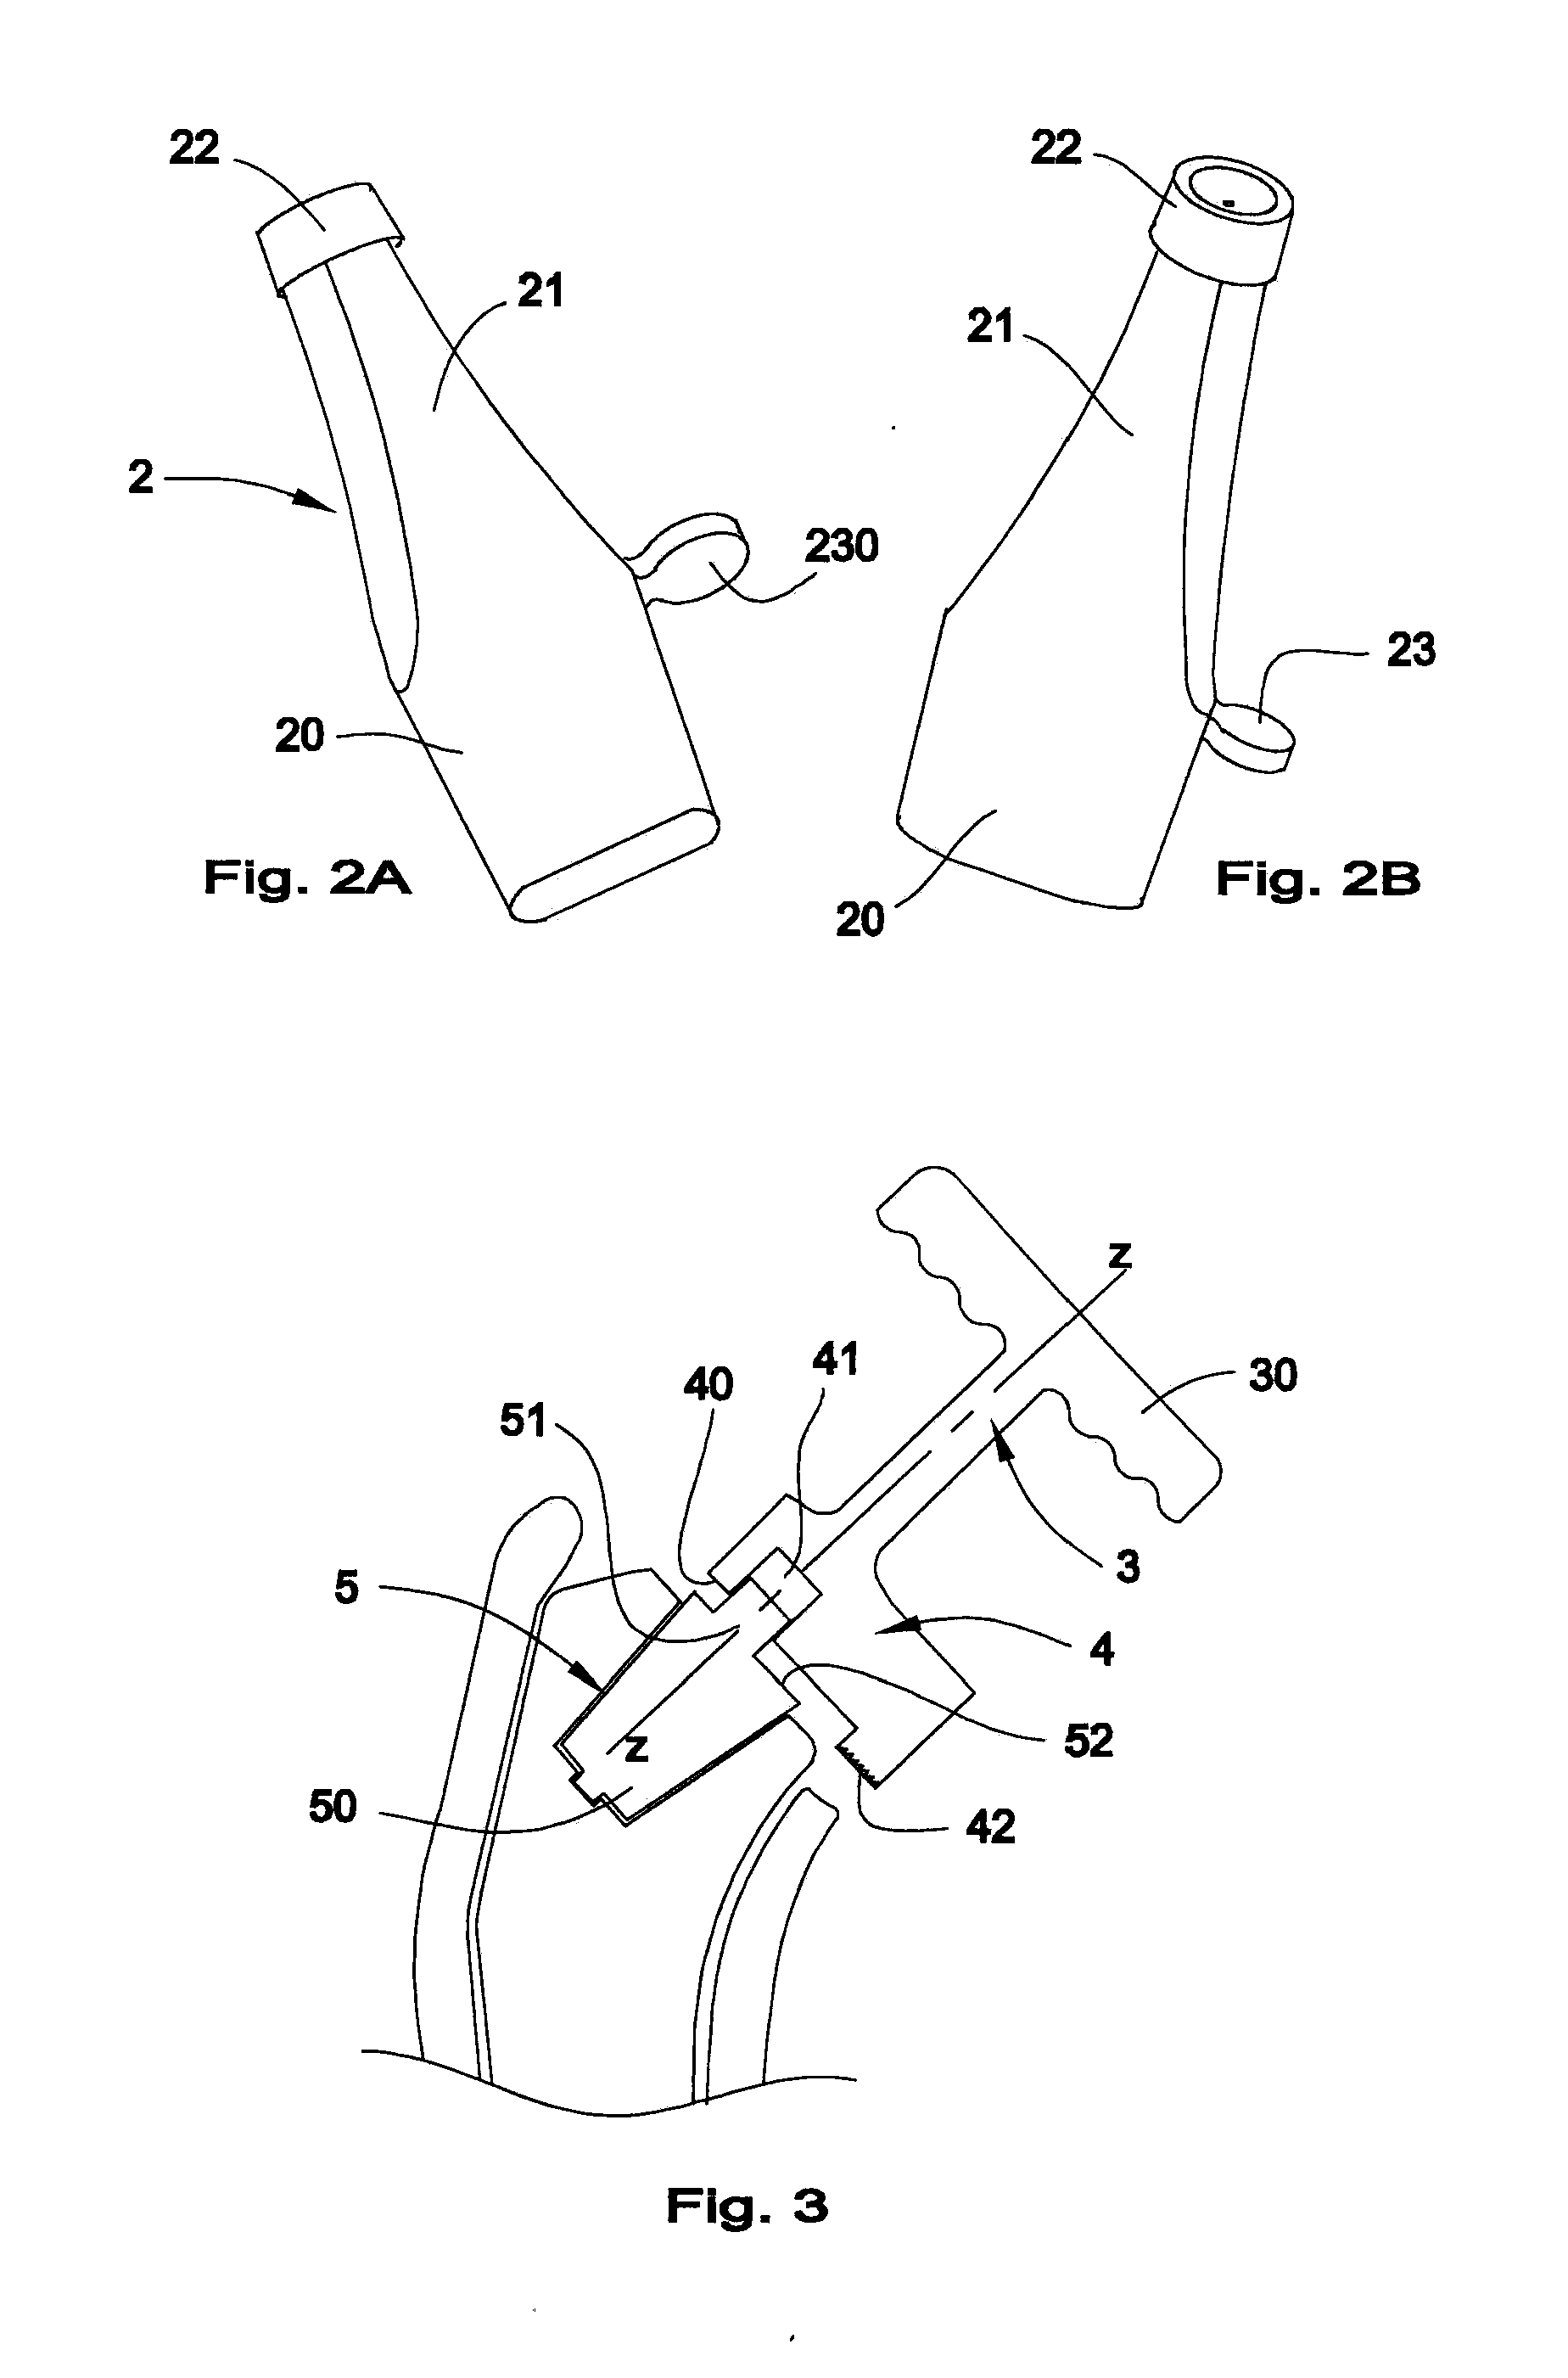 Elements of a femoral prosthesis with a modular neck, tooling for implanting a femoral prosthesis and method of implantation